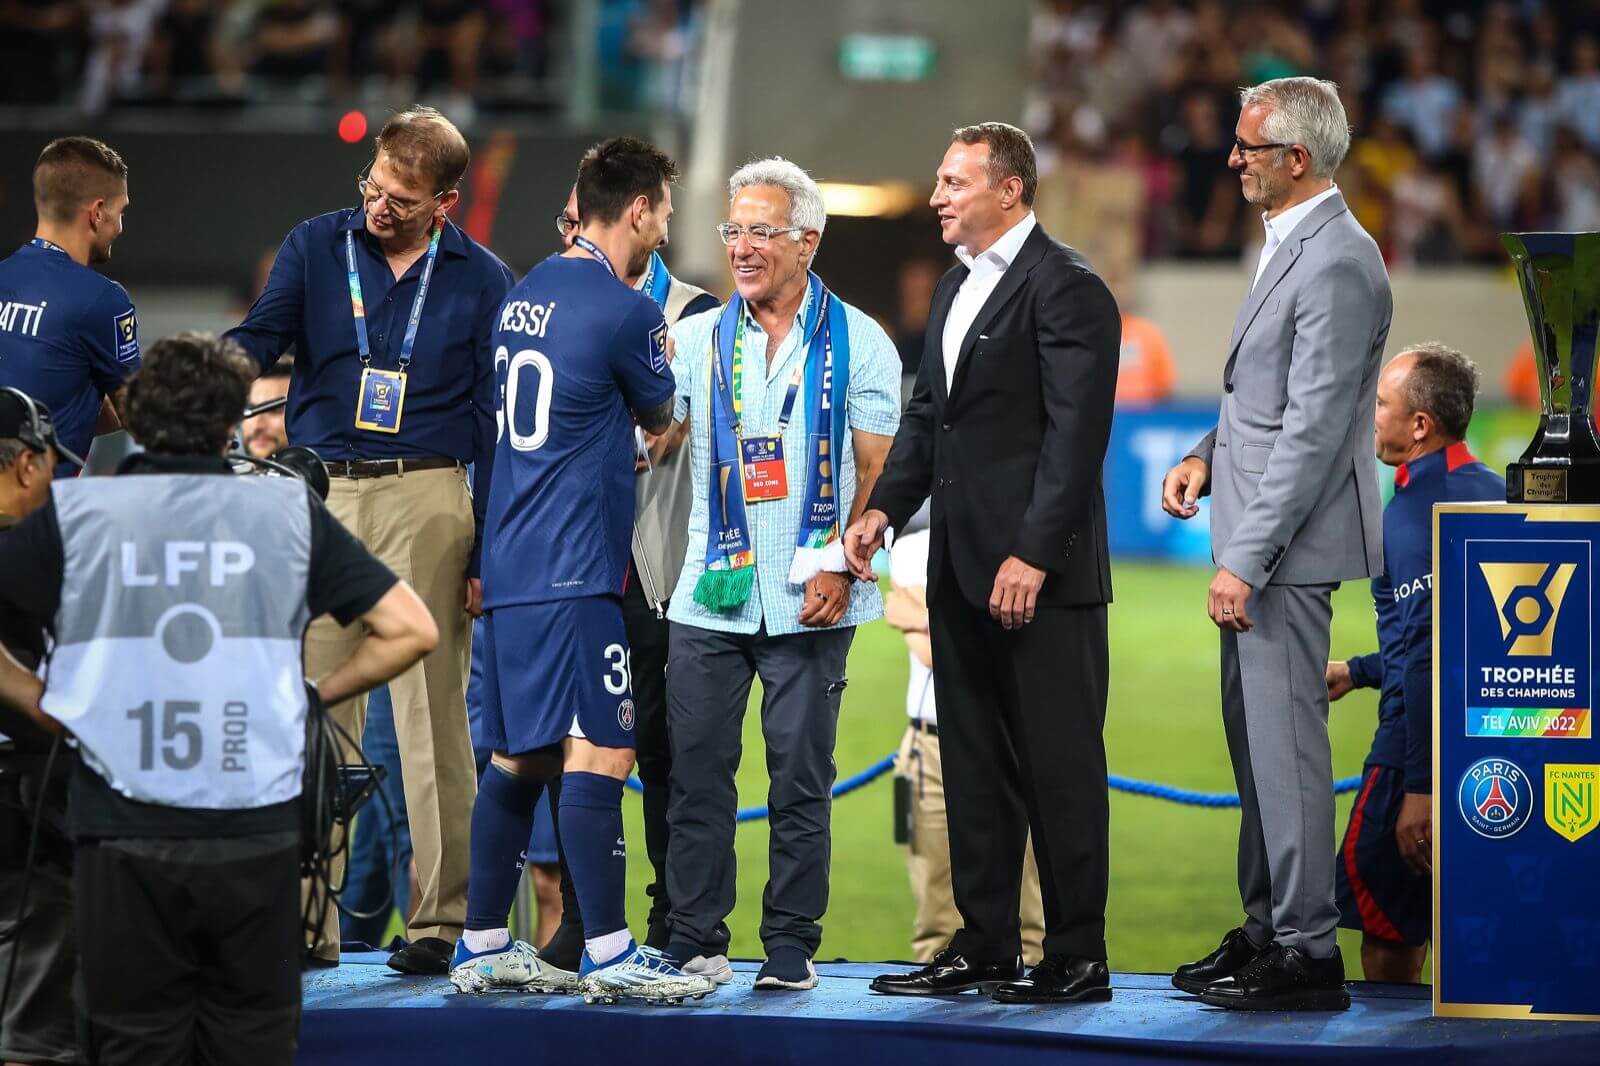 Sylvan Adams, middle, with Lionel Messi after the French Super Cup game in Tel Aviv on July 31, 2022.